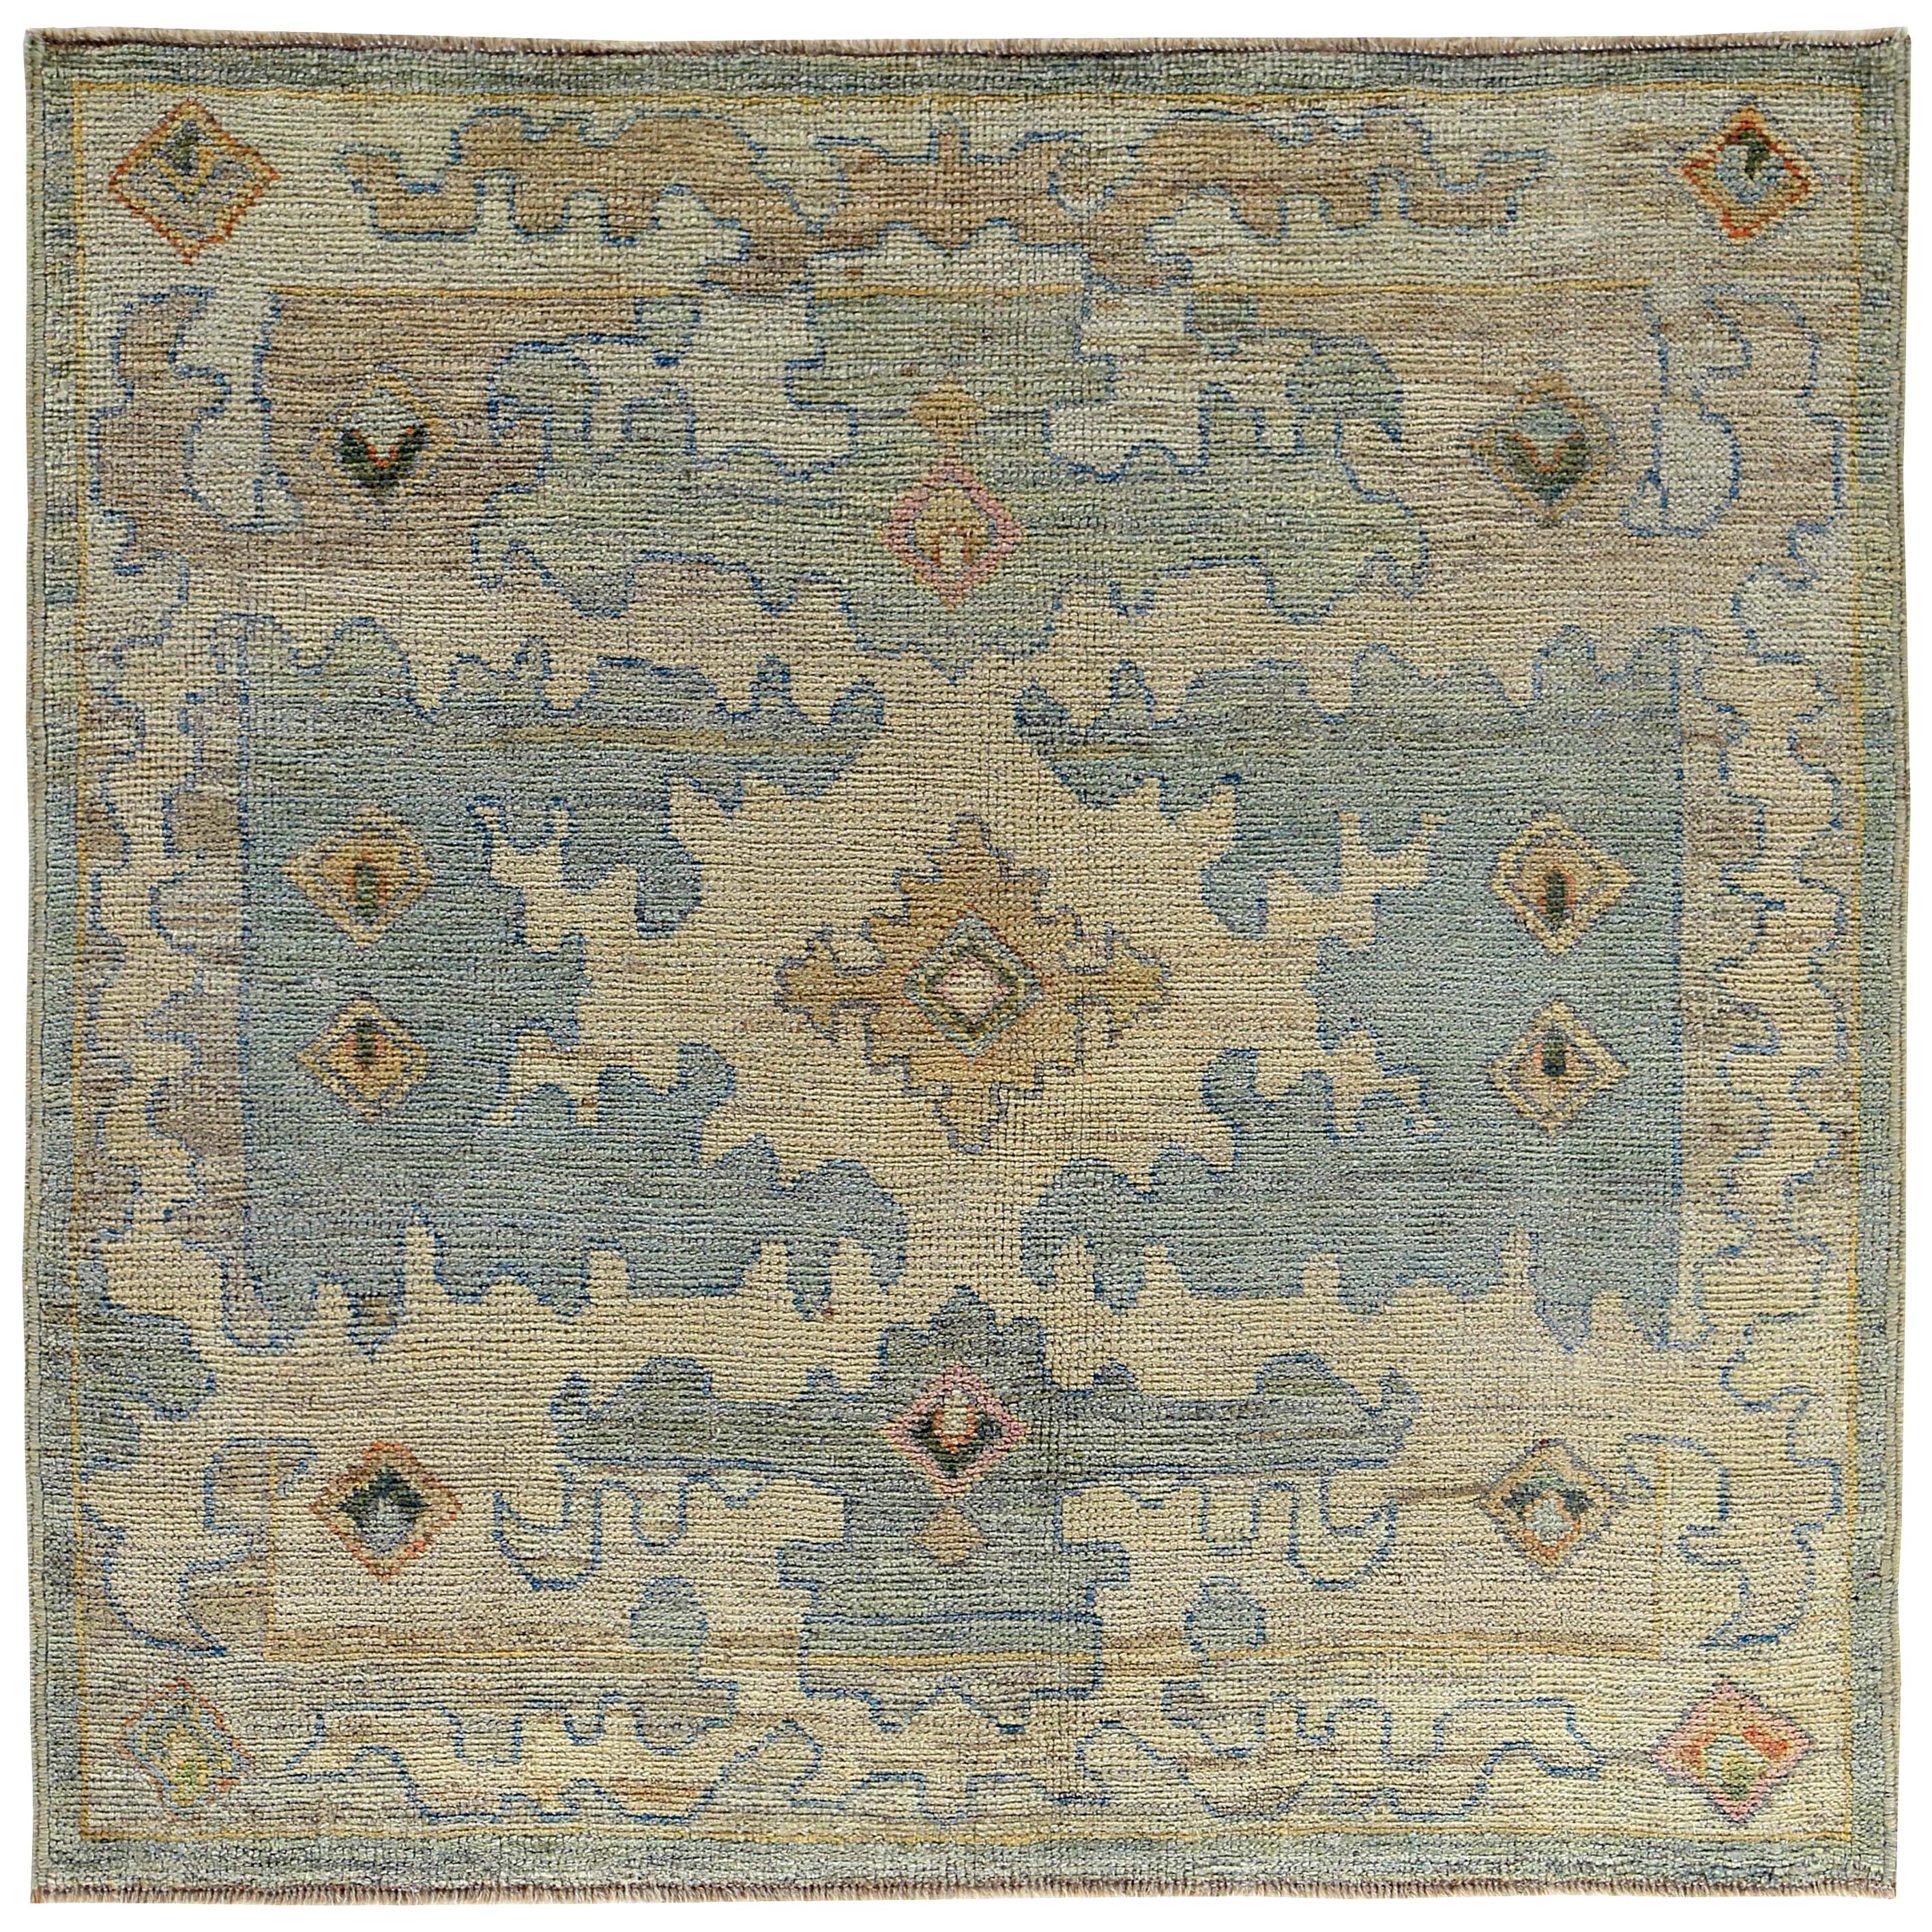 New Turkish Oushak Rug with Blue and Green Floral Details on Beige Field For Sale